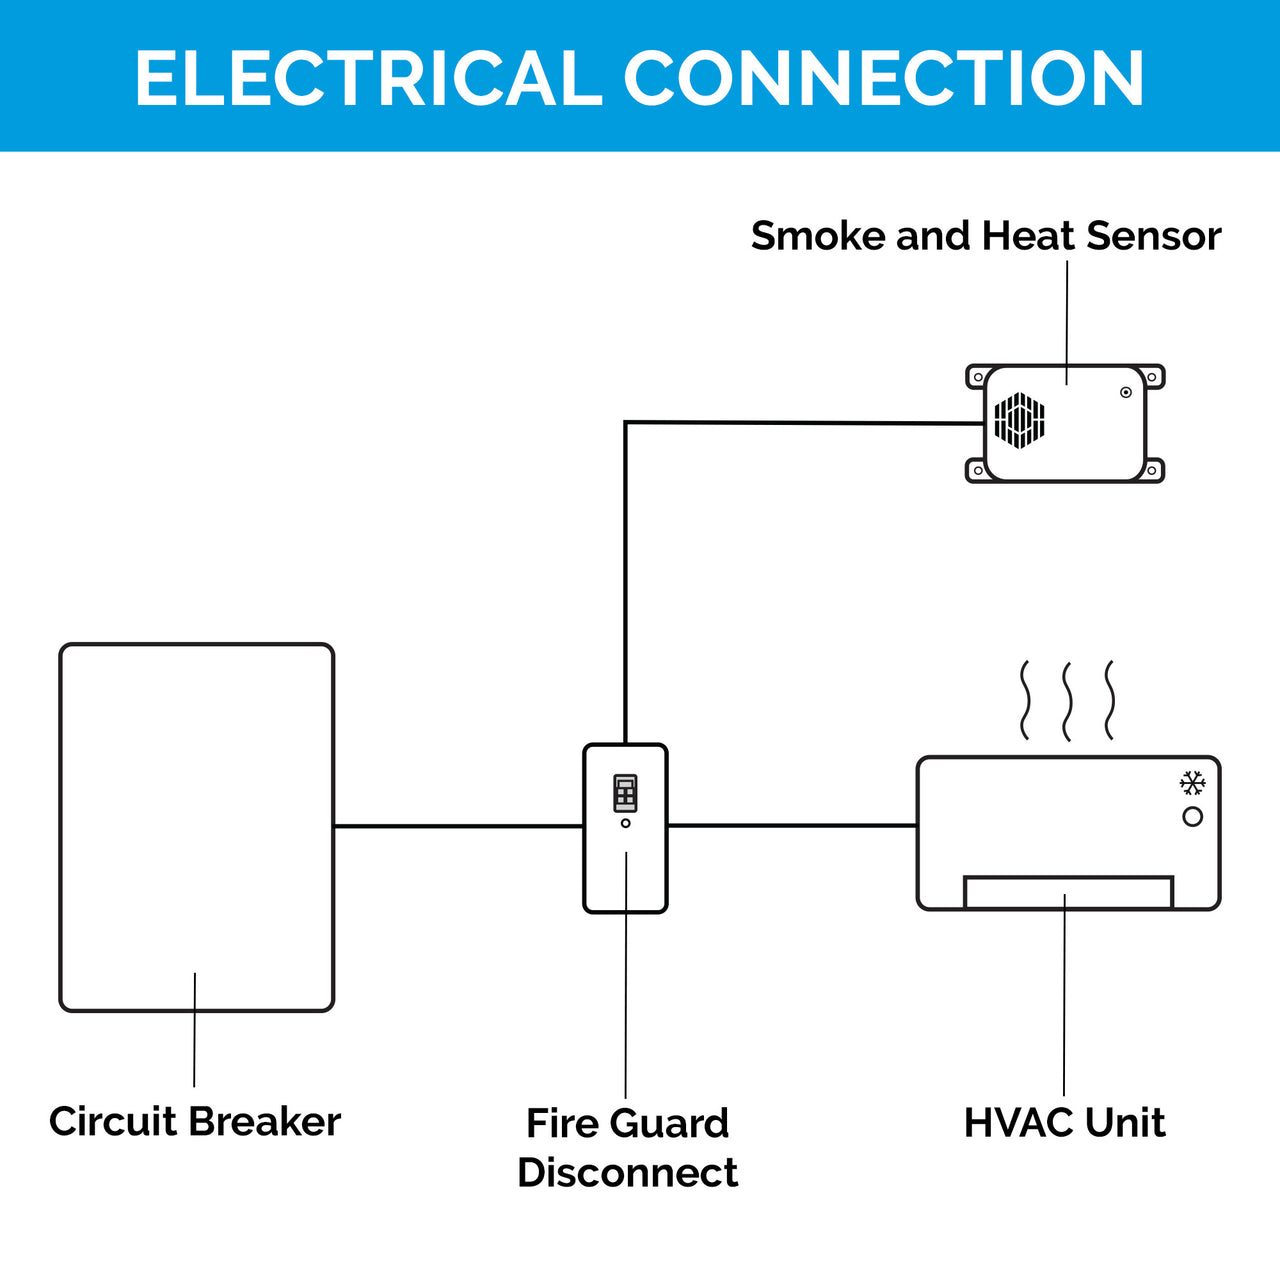 Fire Guard Disconnect with Smoke and Heat Sensor